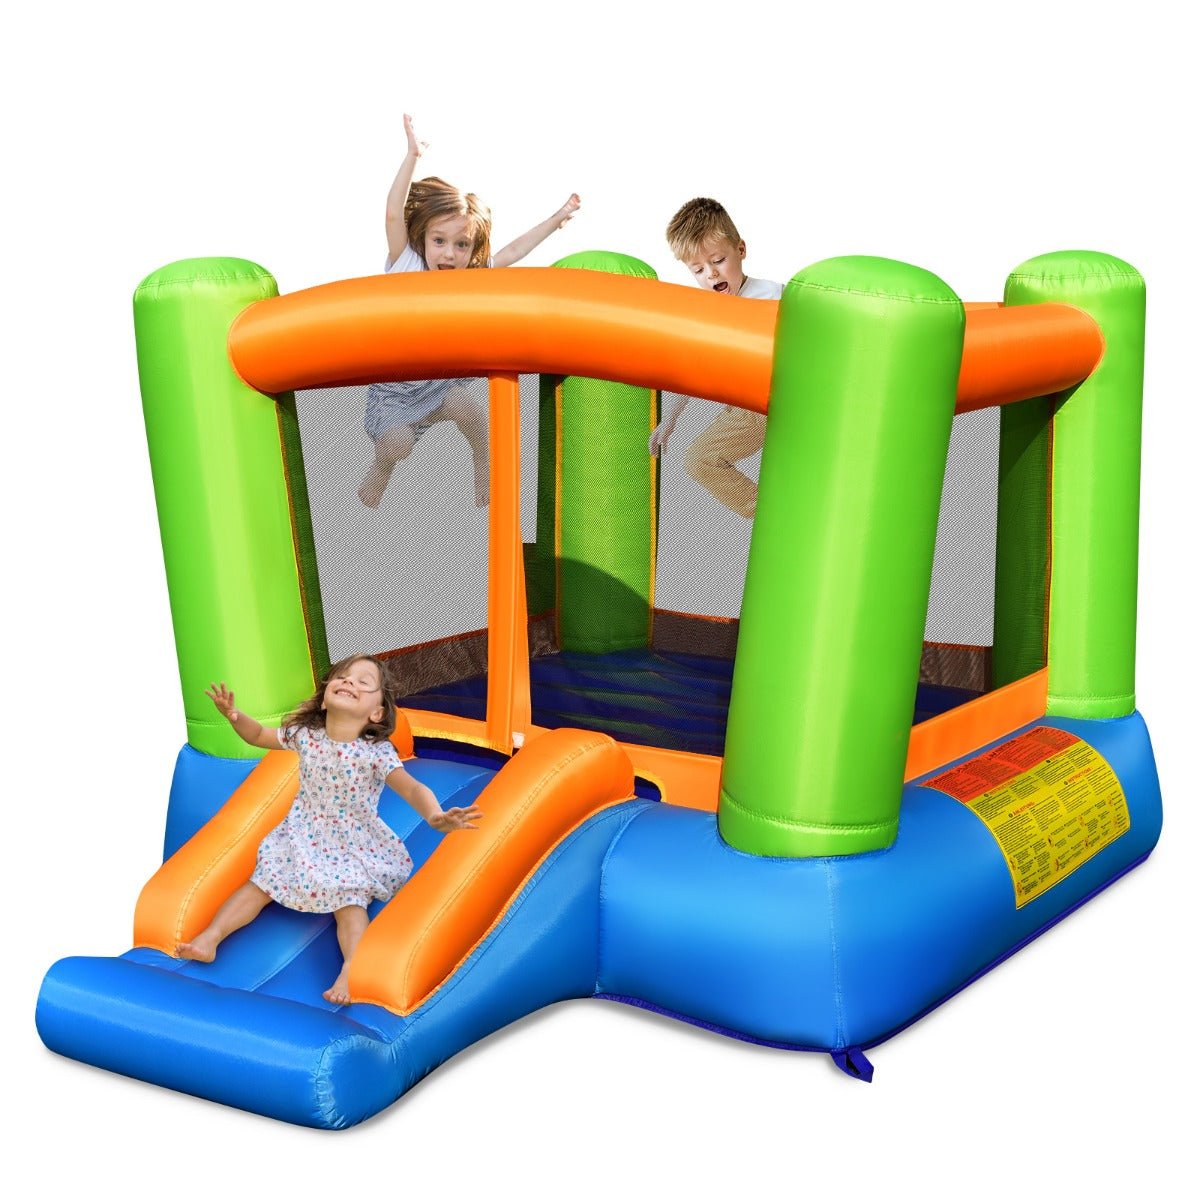 Kids Slide and Bounce House - Inflatable Fun (No Blower)